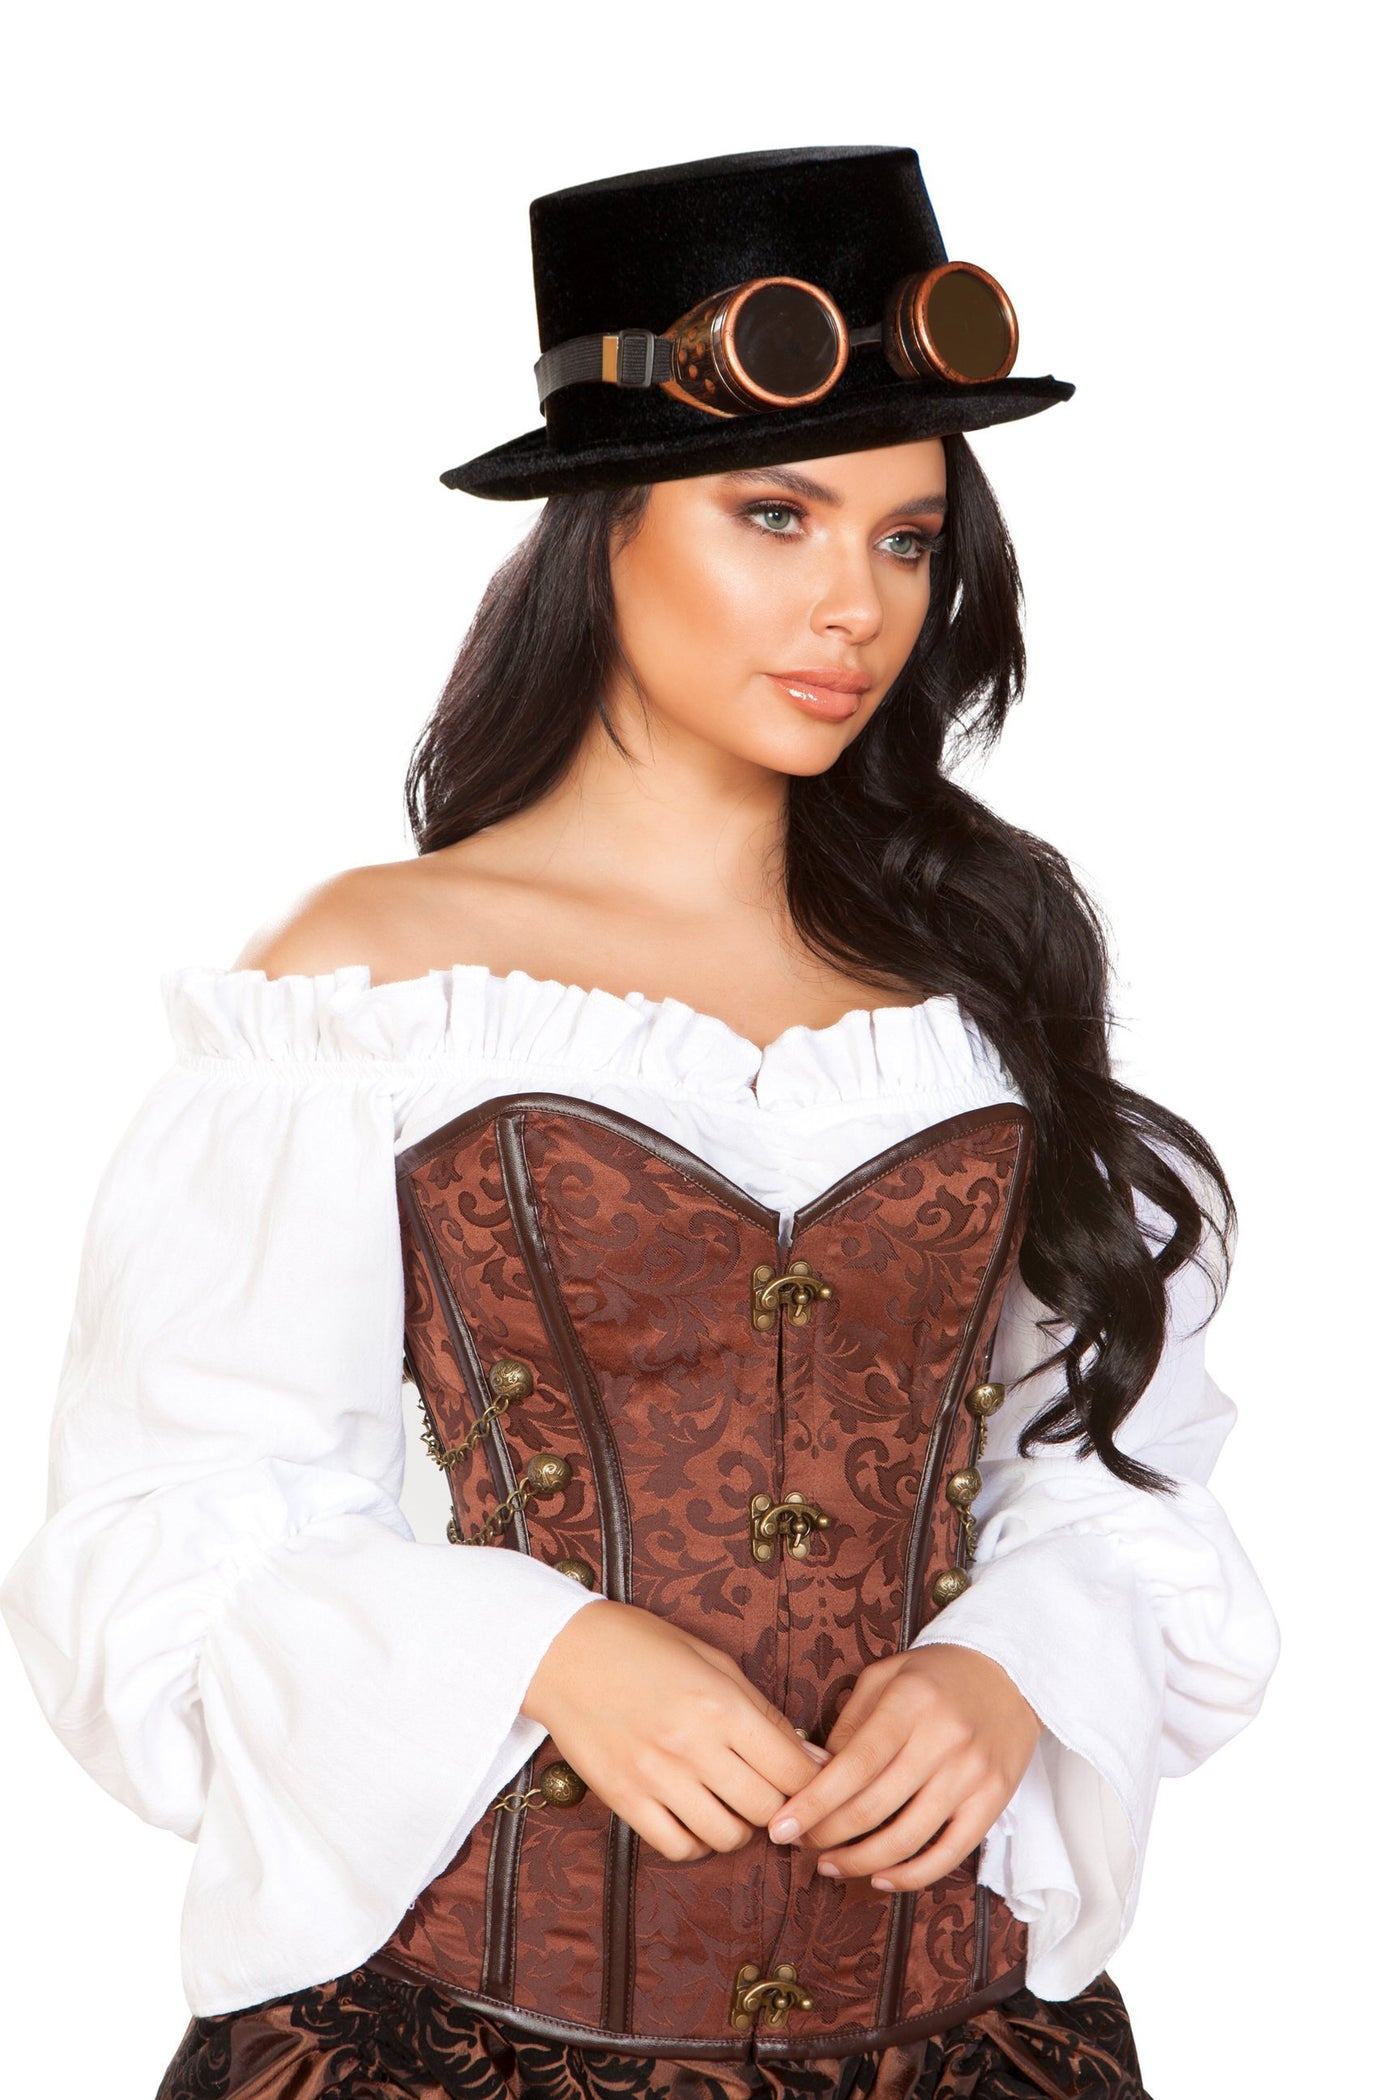 Buy 6pc Machinery Steampunk from RomaRetailShop for 169.99 with Same Day Shipping Designed by Roma Costume 4917-AS-S